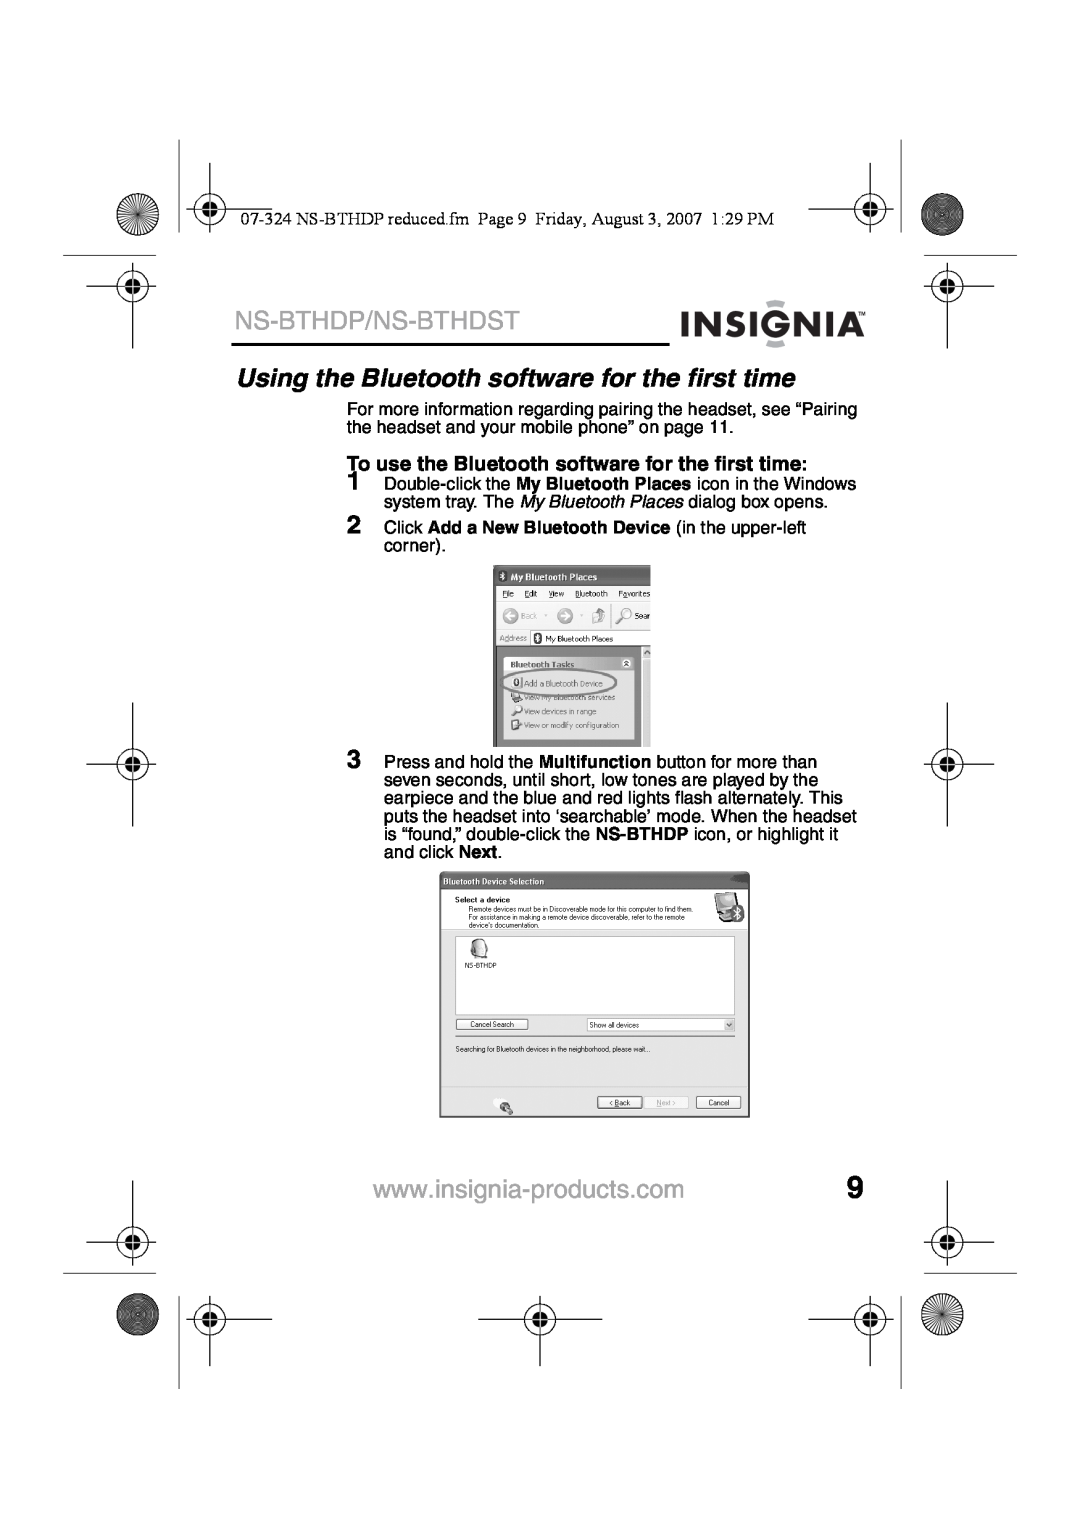 Insignia NS-BTHDST manual Using the Bluetooth software for the first time, Ns-Bthdp/Ns-Bthdst 